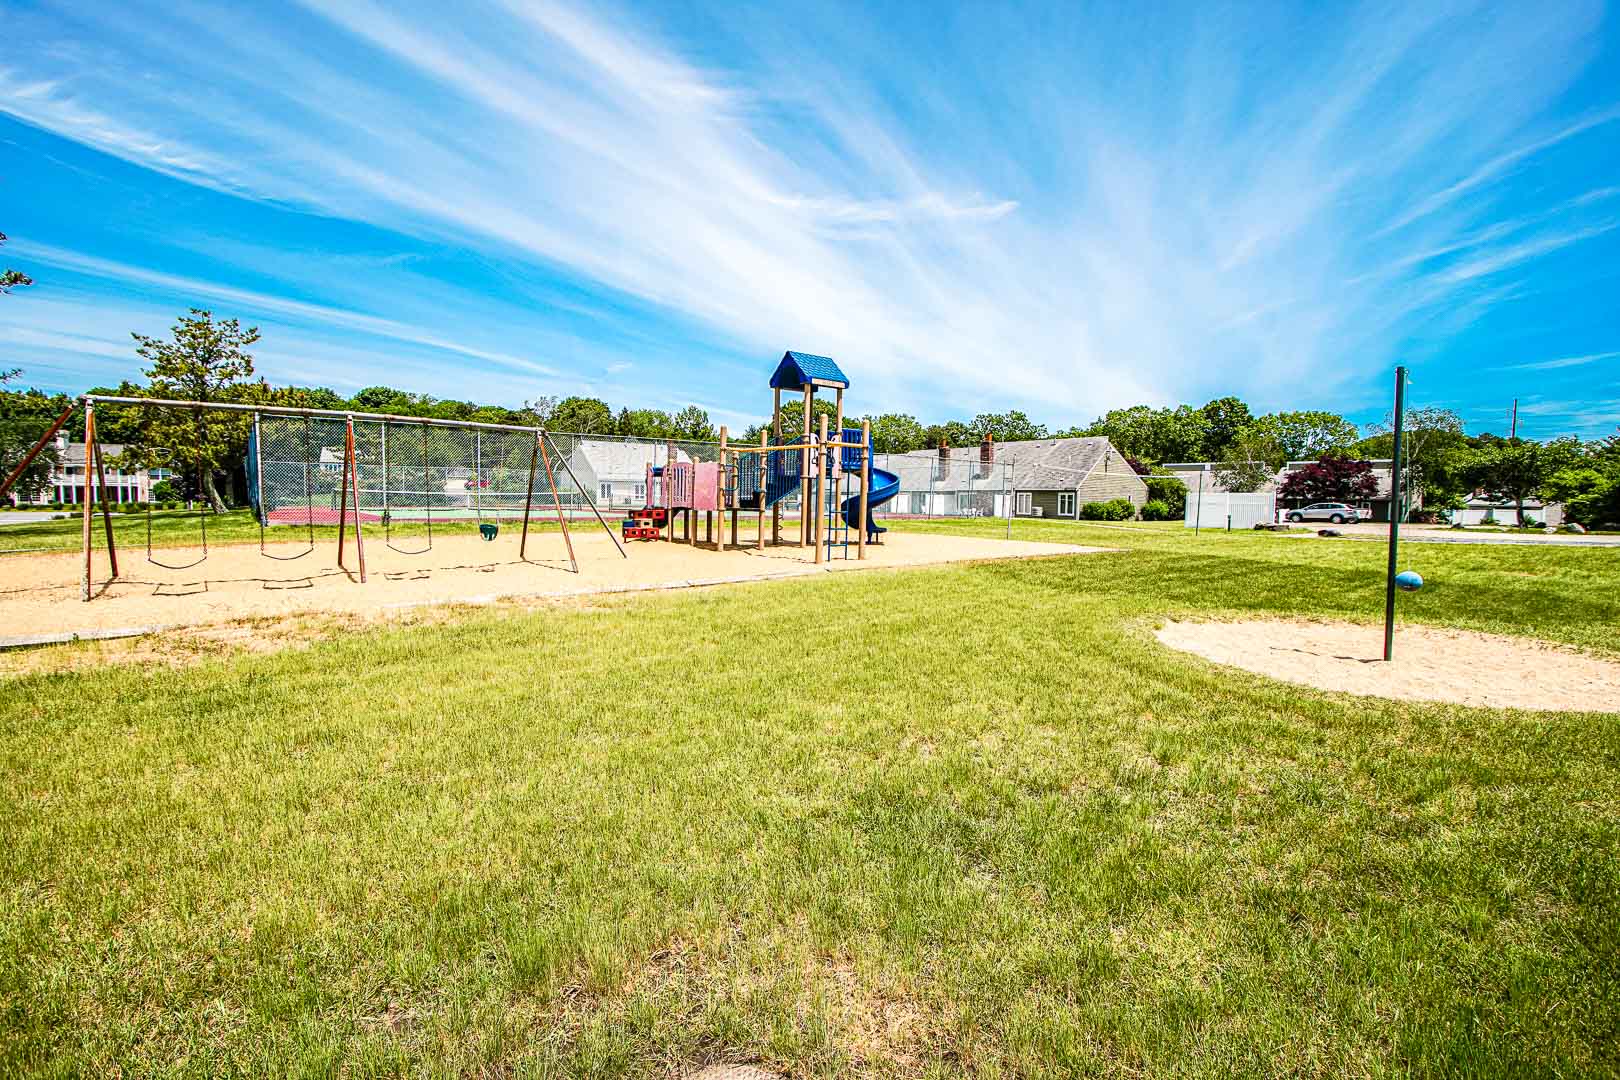 A serene view of the playground area at VRI's Brewster Green Resort in Massachusetts.